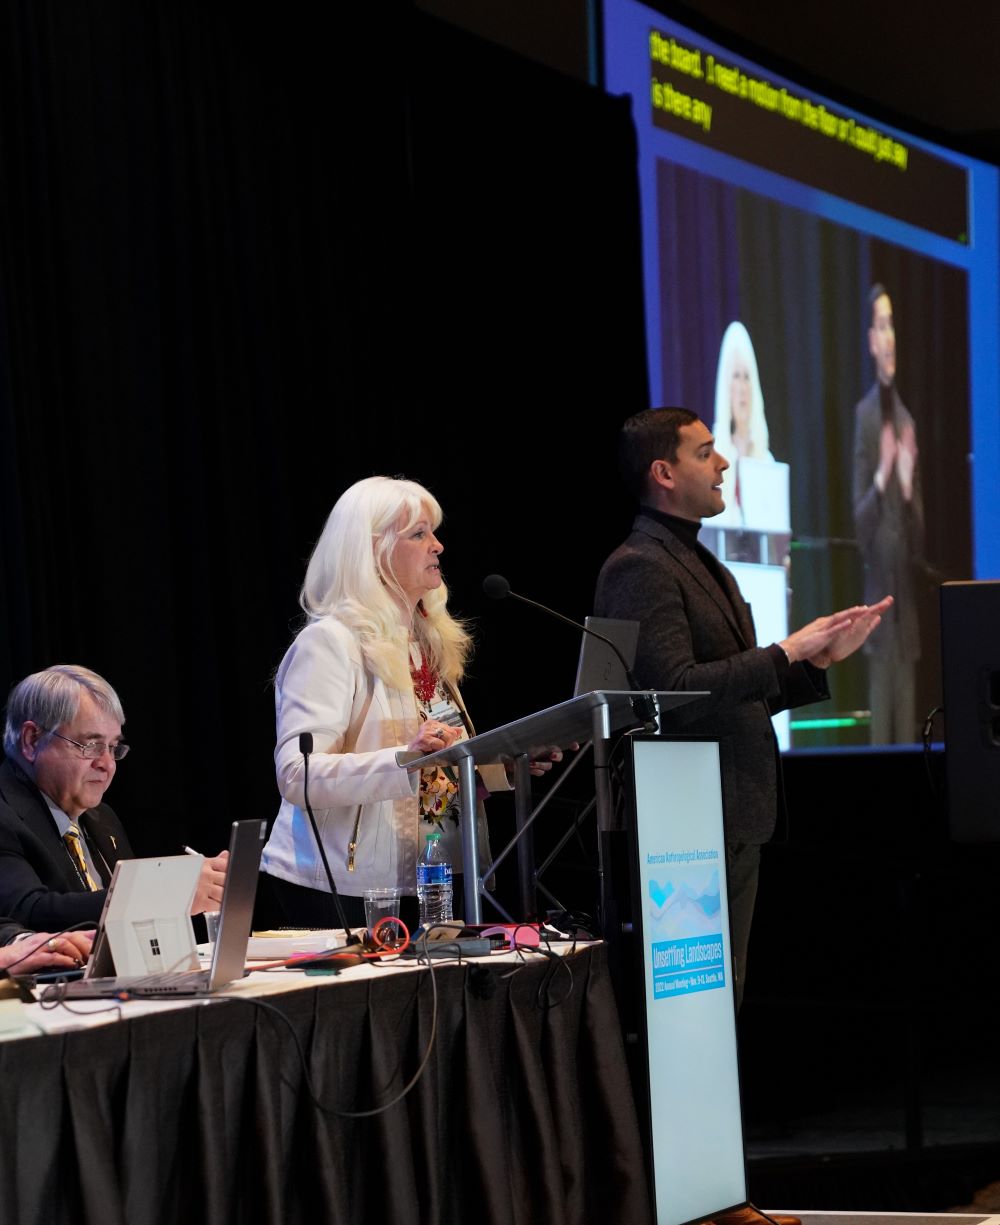 Ramona Pérez stands at a lectern and reads an address from a laptop. She is a light-skinned woman with long white hair wearing a white jacket and a red beaded necklace. To her left is Kyle Duarte, a medium-skinned man with short dark hair. Kyle is wearing a brown suit jacket and a dark turtleneck. Kyle is interpreting Ramona's remarks in American Sign Language. Behind Ramona and Kyle is a projection screen that shows a video feed of the two of them, with captions provided in yellow font at the top of the screen.